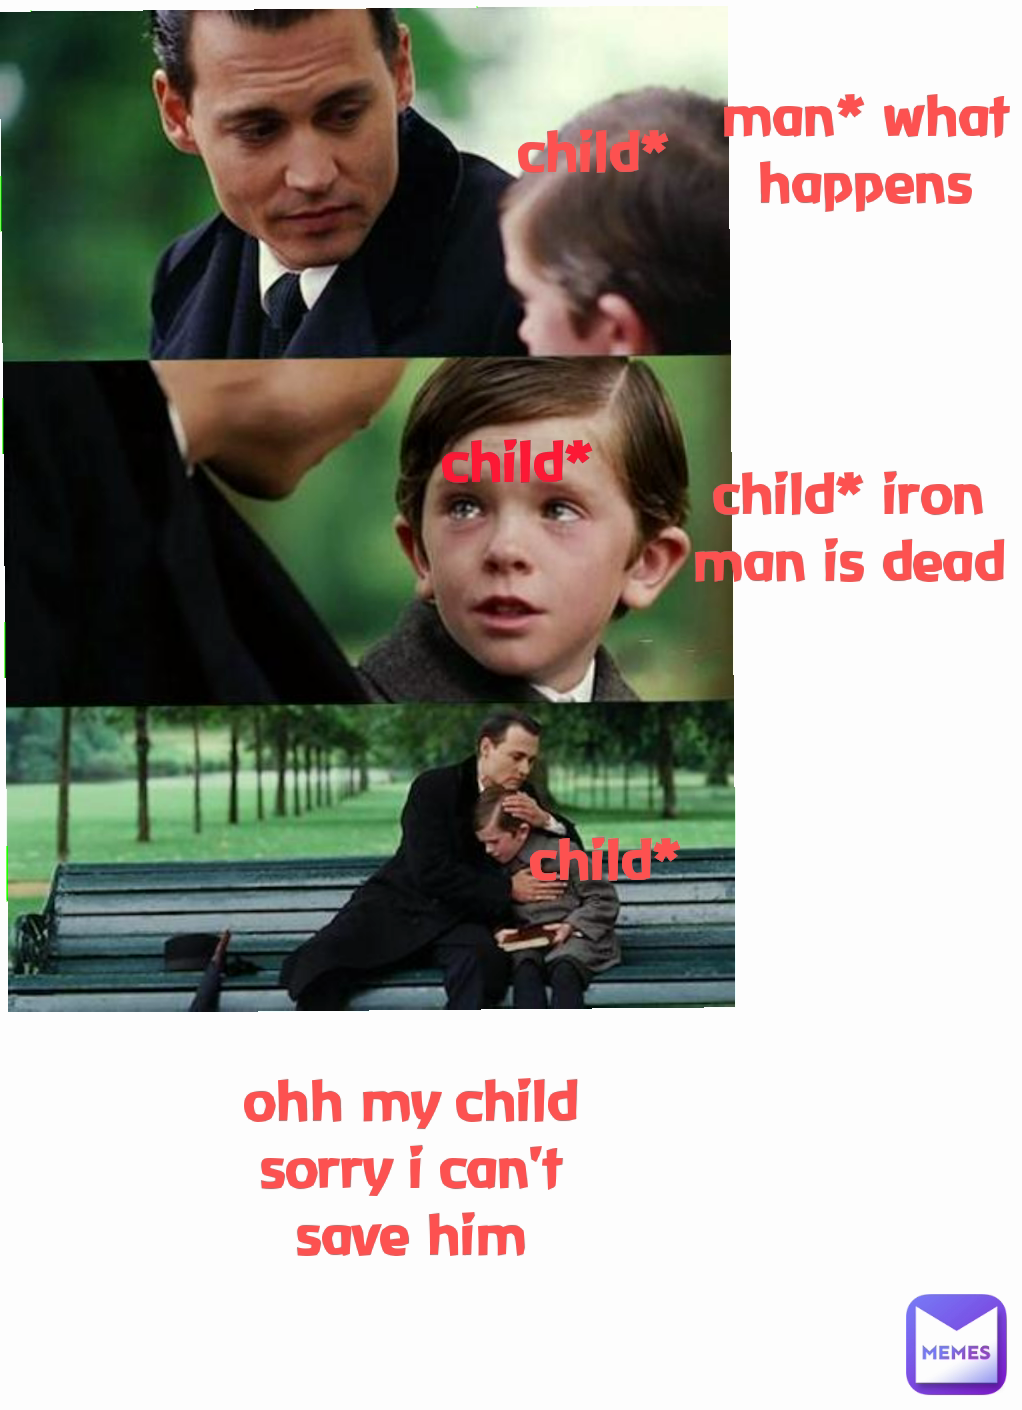 child* iron man is dead child* child* child* man* what happens ohh my child sorry i can't save him